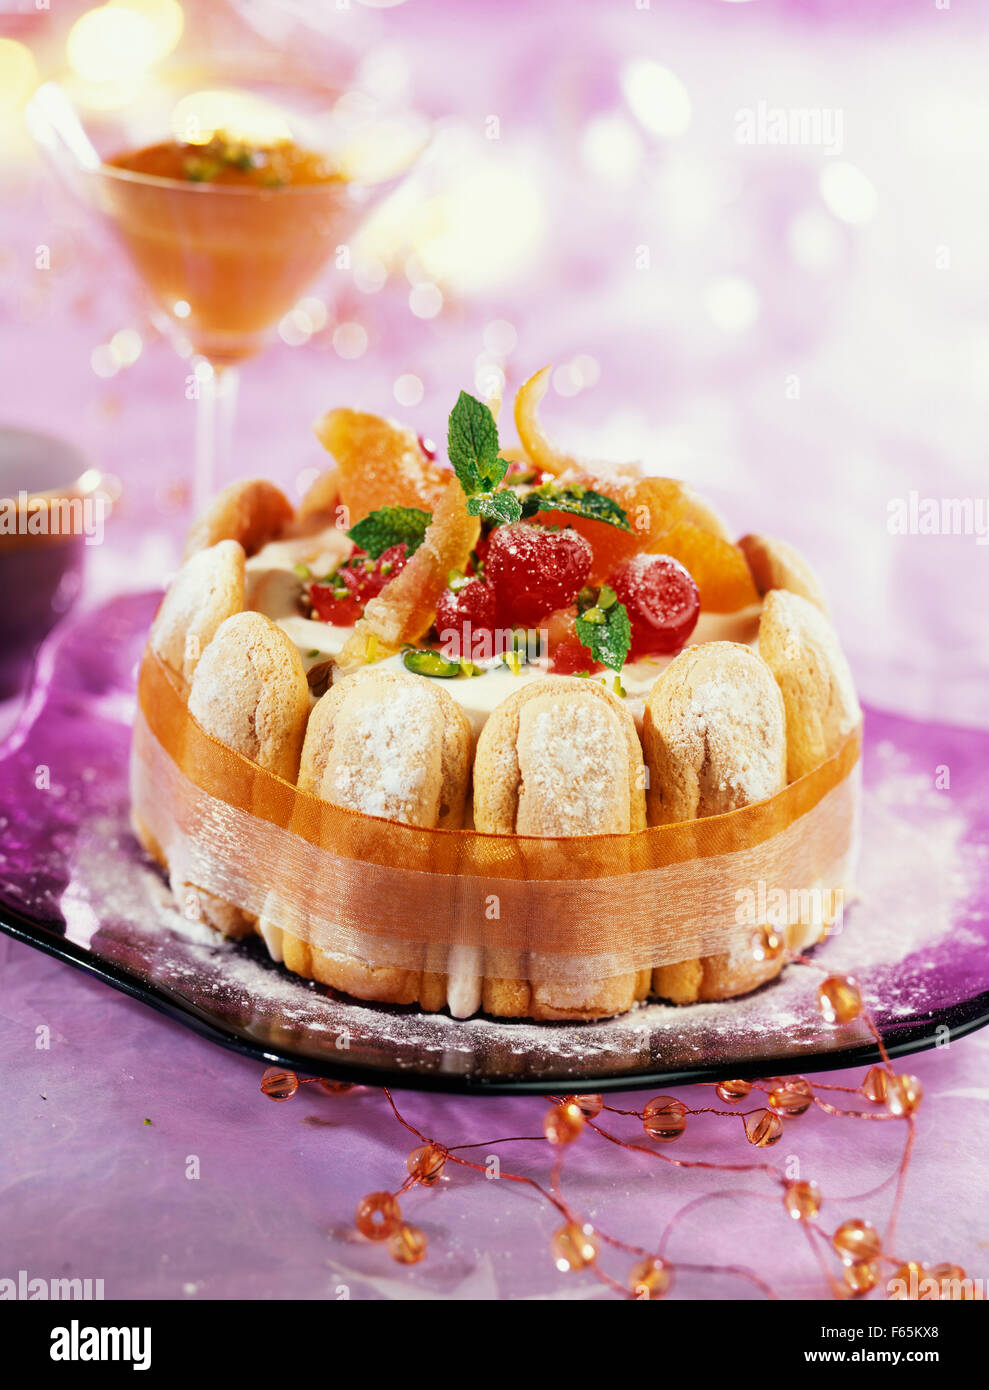 ice cream, nougat and candied fruit charlotte Stock Photo